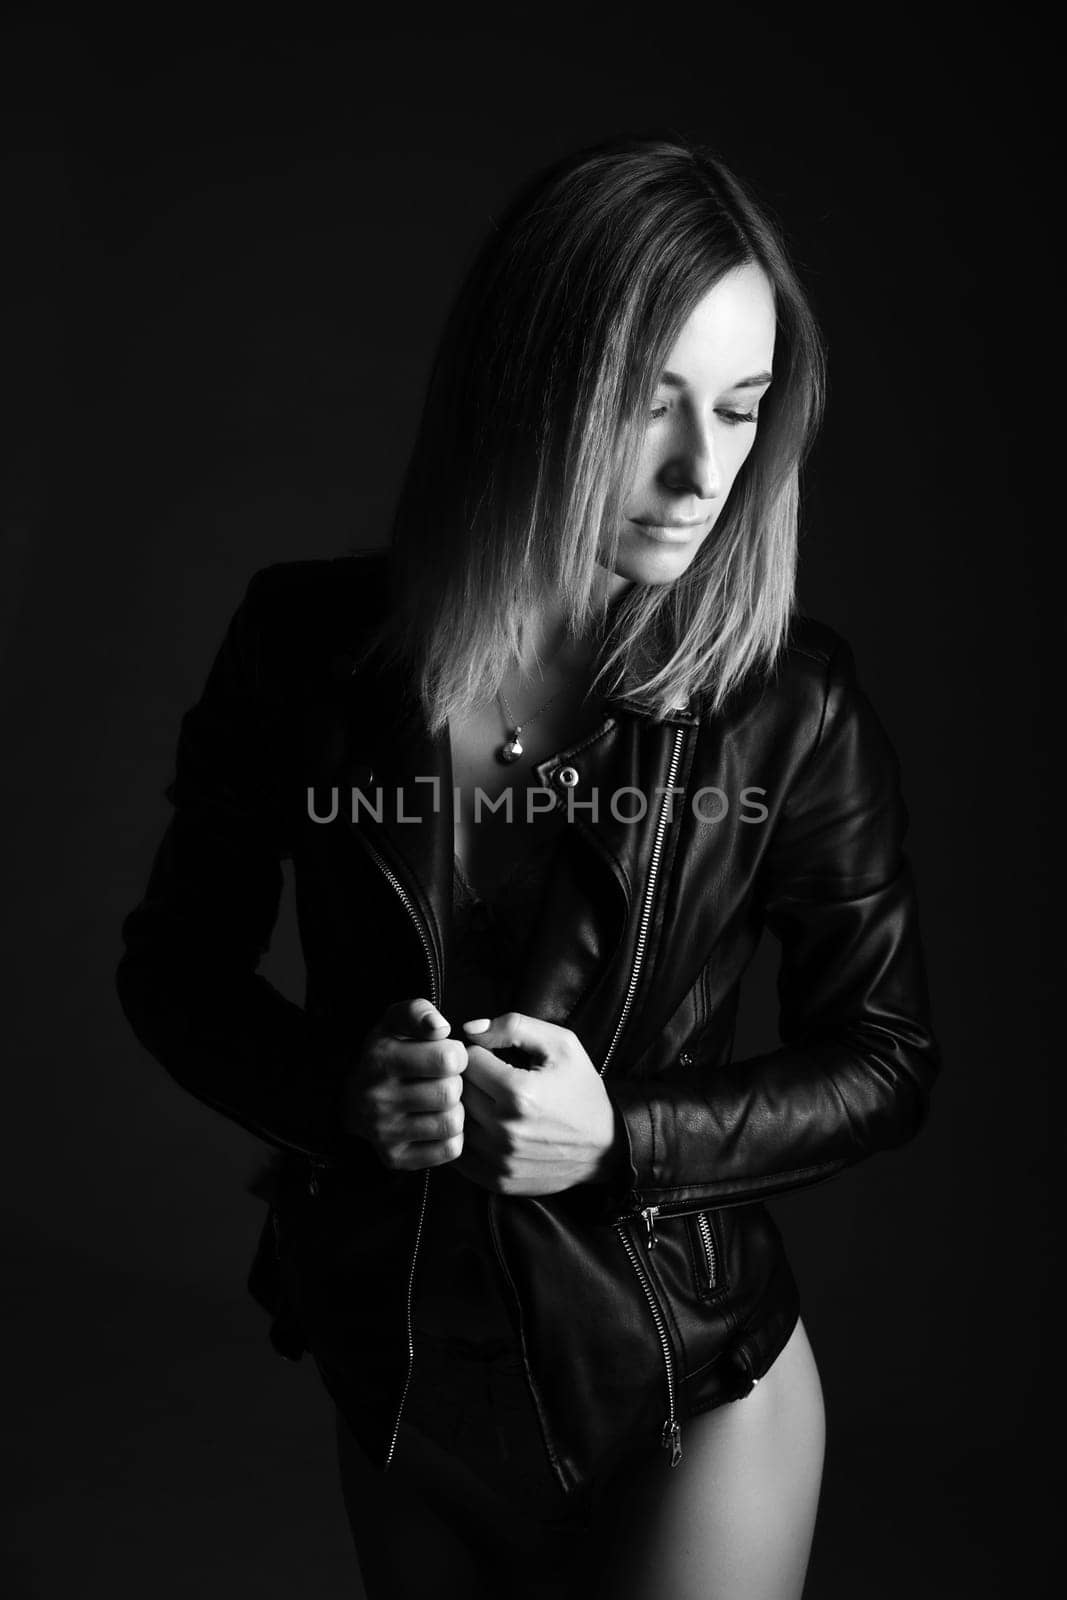 Portrait of a woman in a leather jacket and lingerie, black and white photo by EkaterinaPereslavtseva